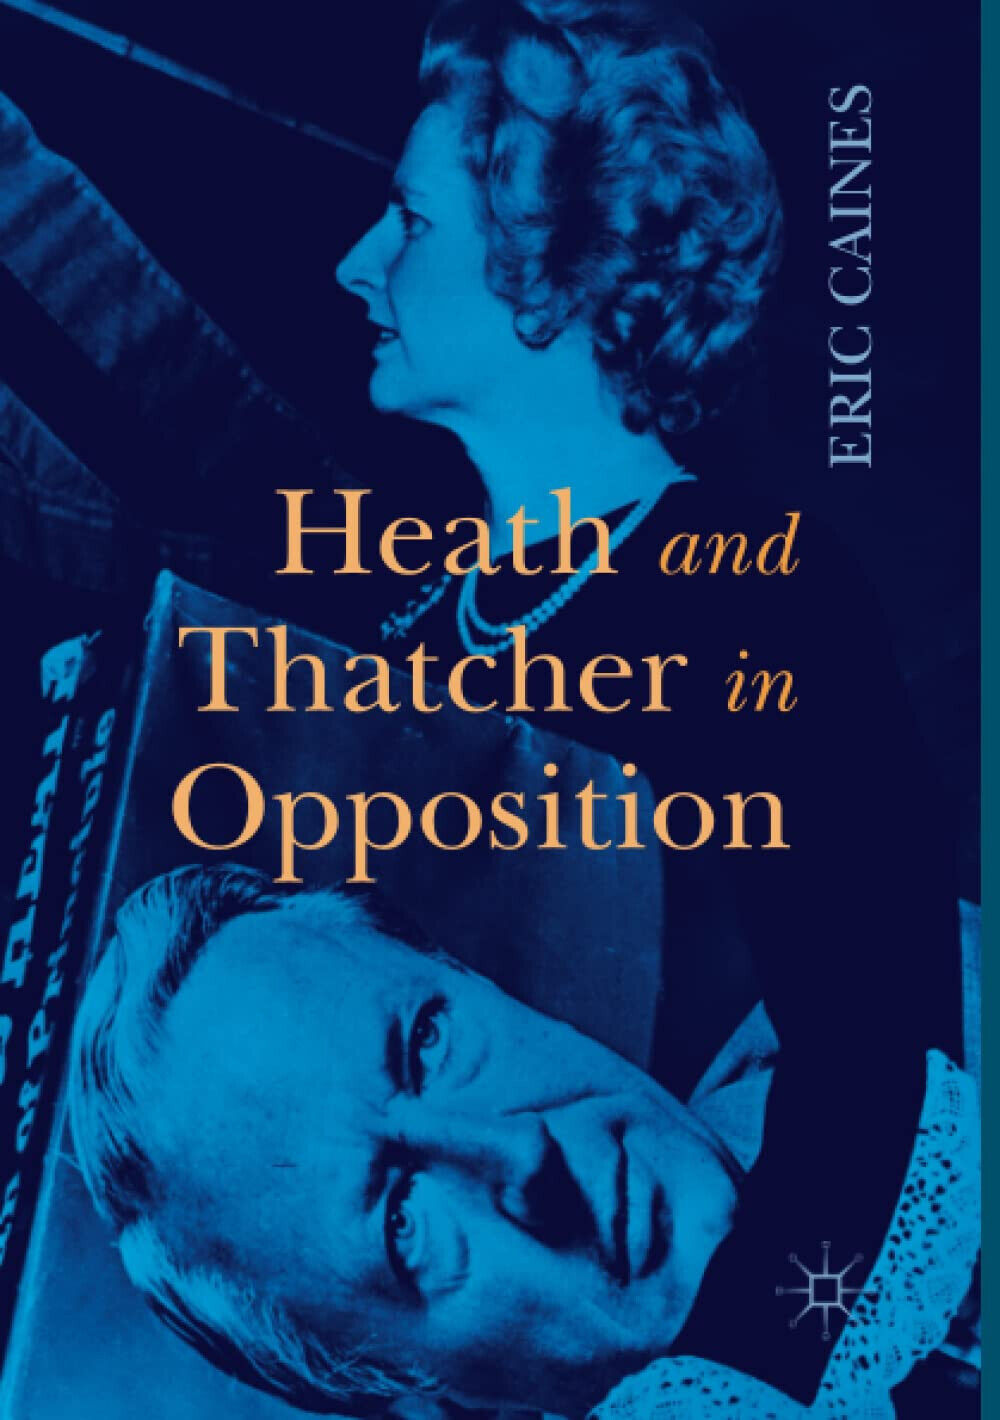 Heath and Thatcher in Opposition - Eric Caines - Palgrave, 2018